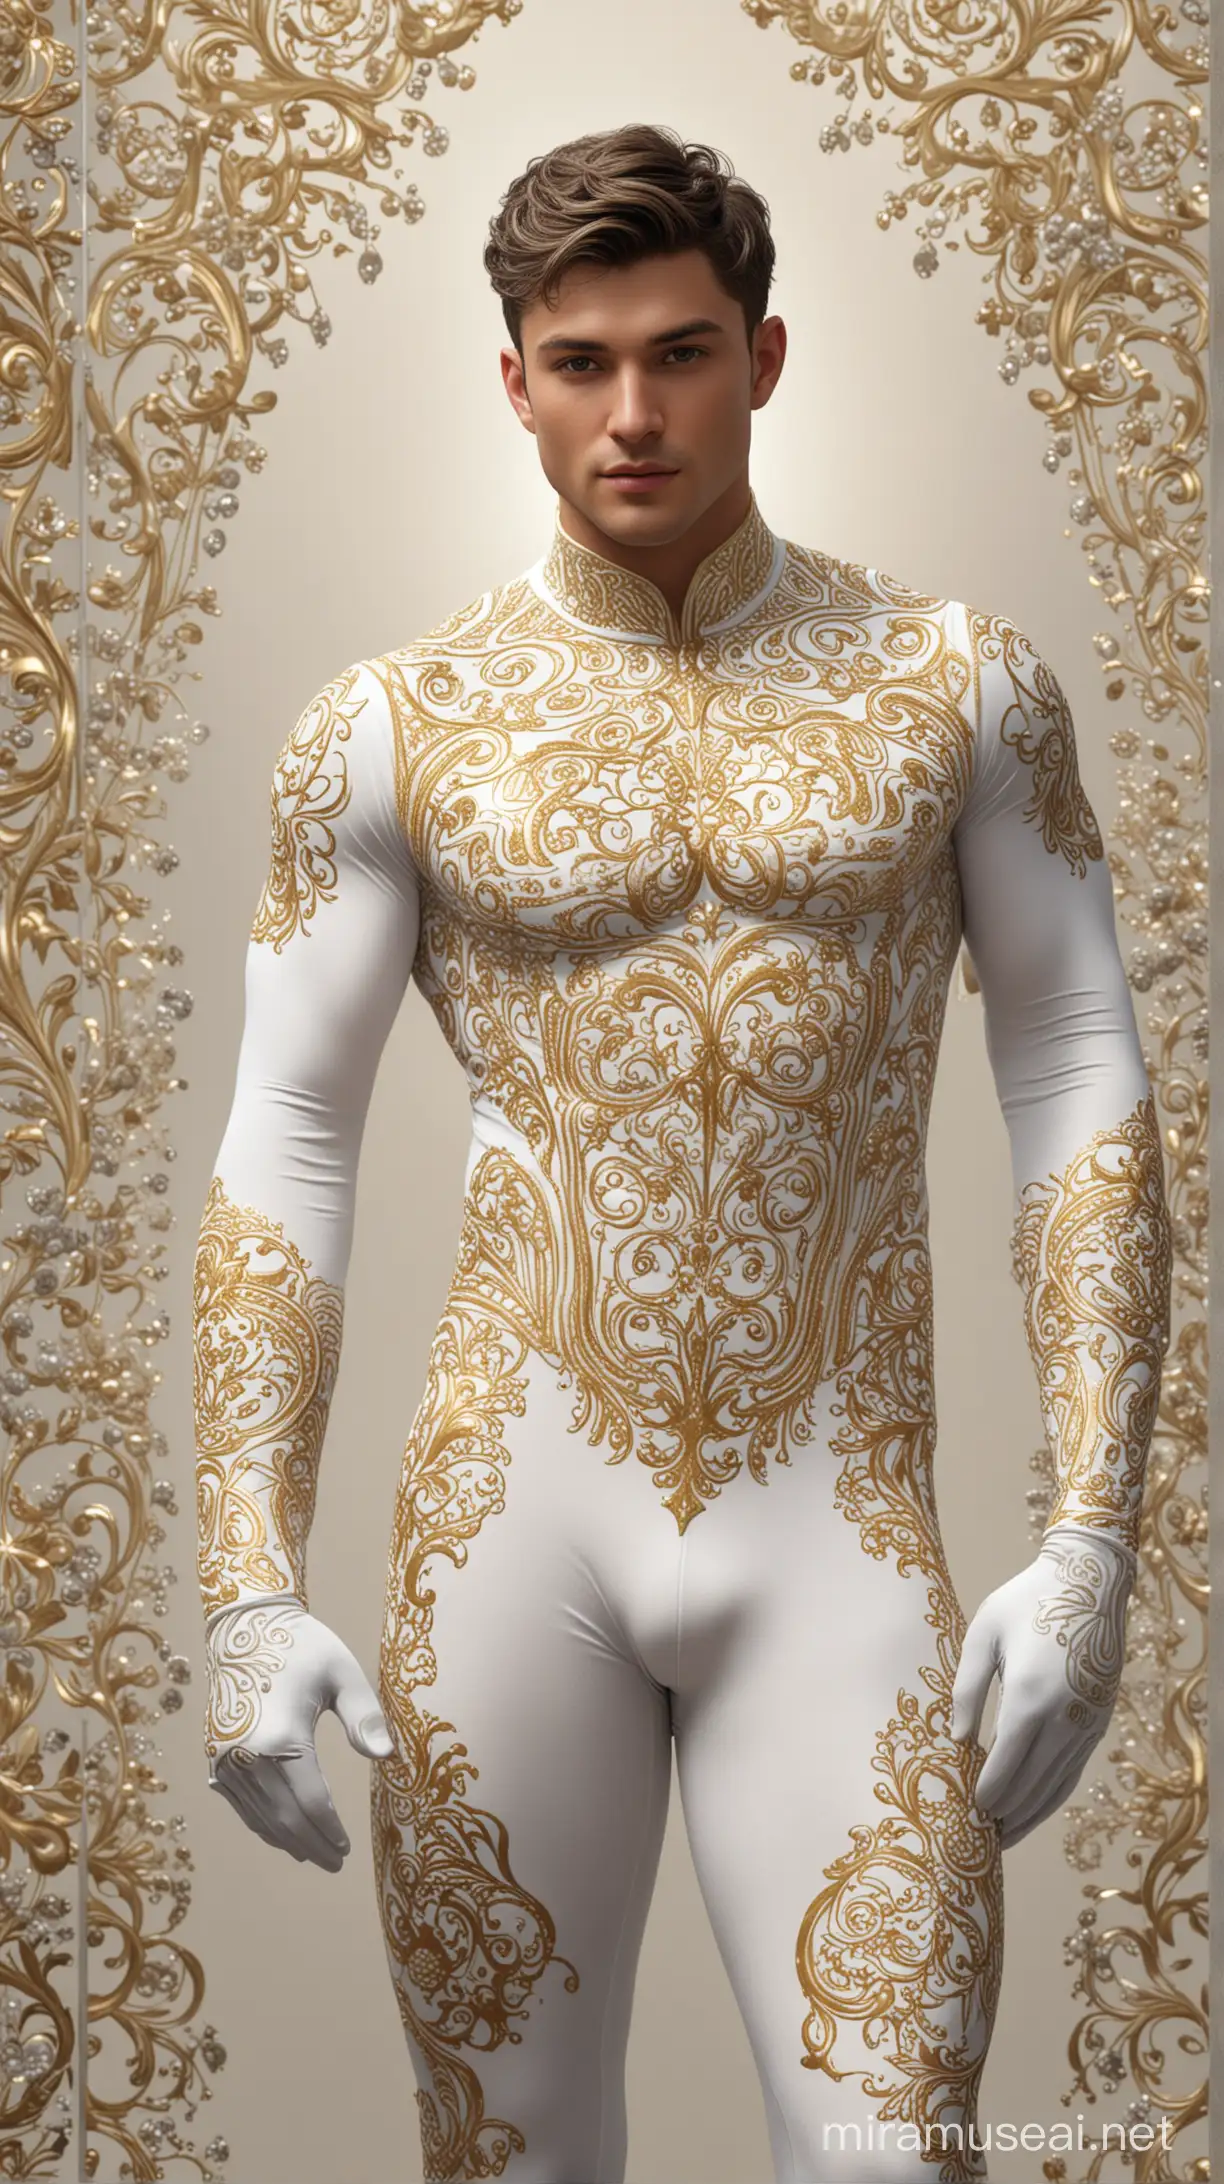 Celestial Teng Aesthetically Enhanced Fractal Male in White and Gold Biomorphic Spandex